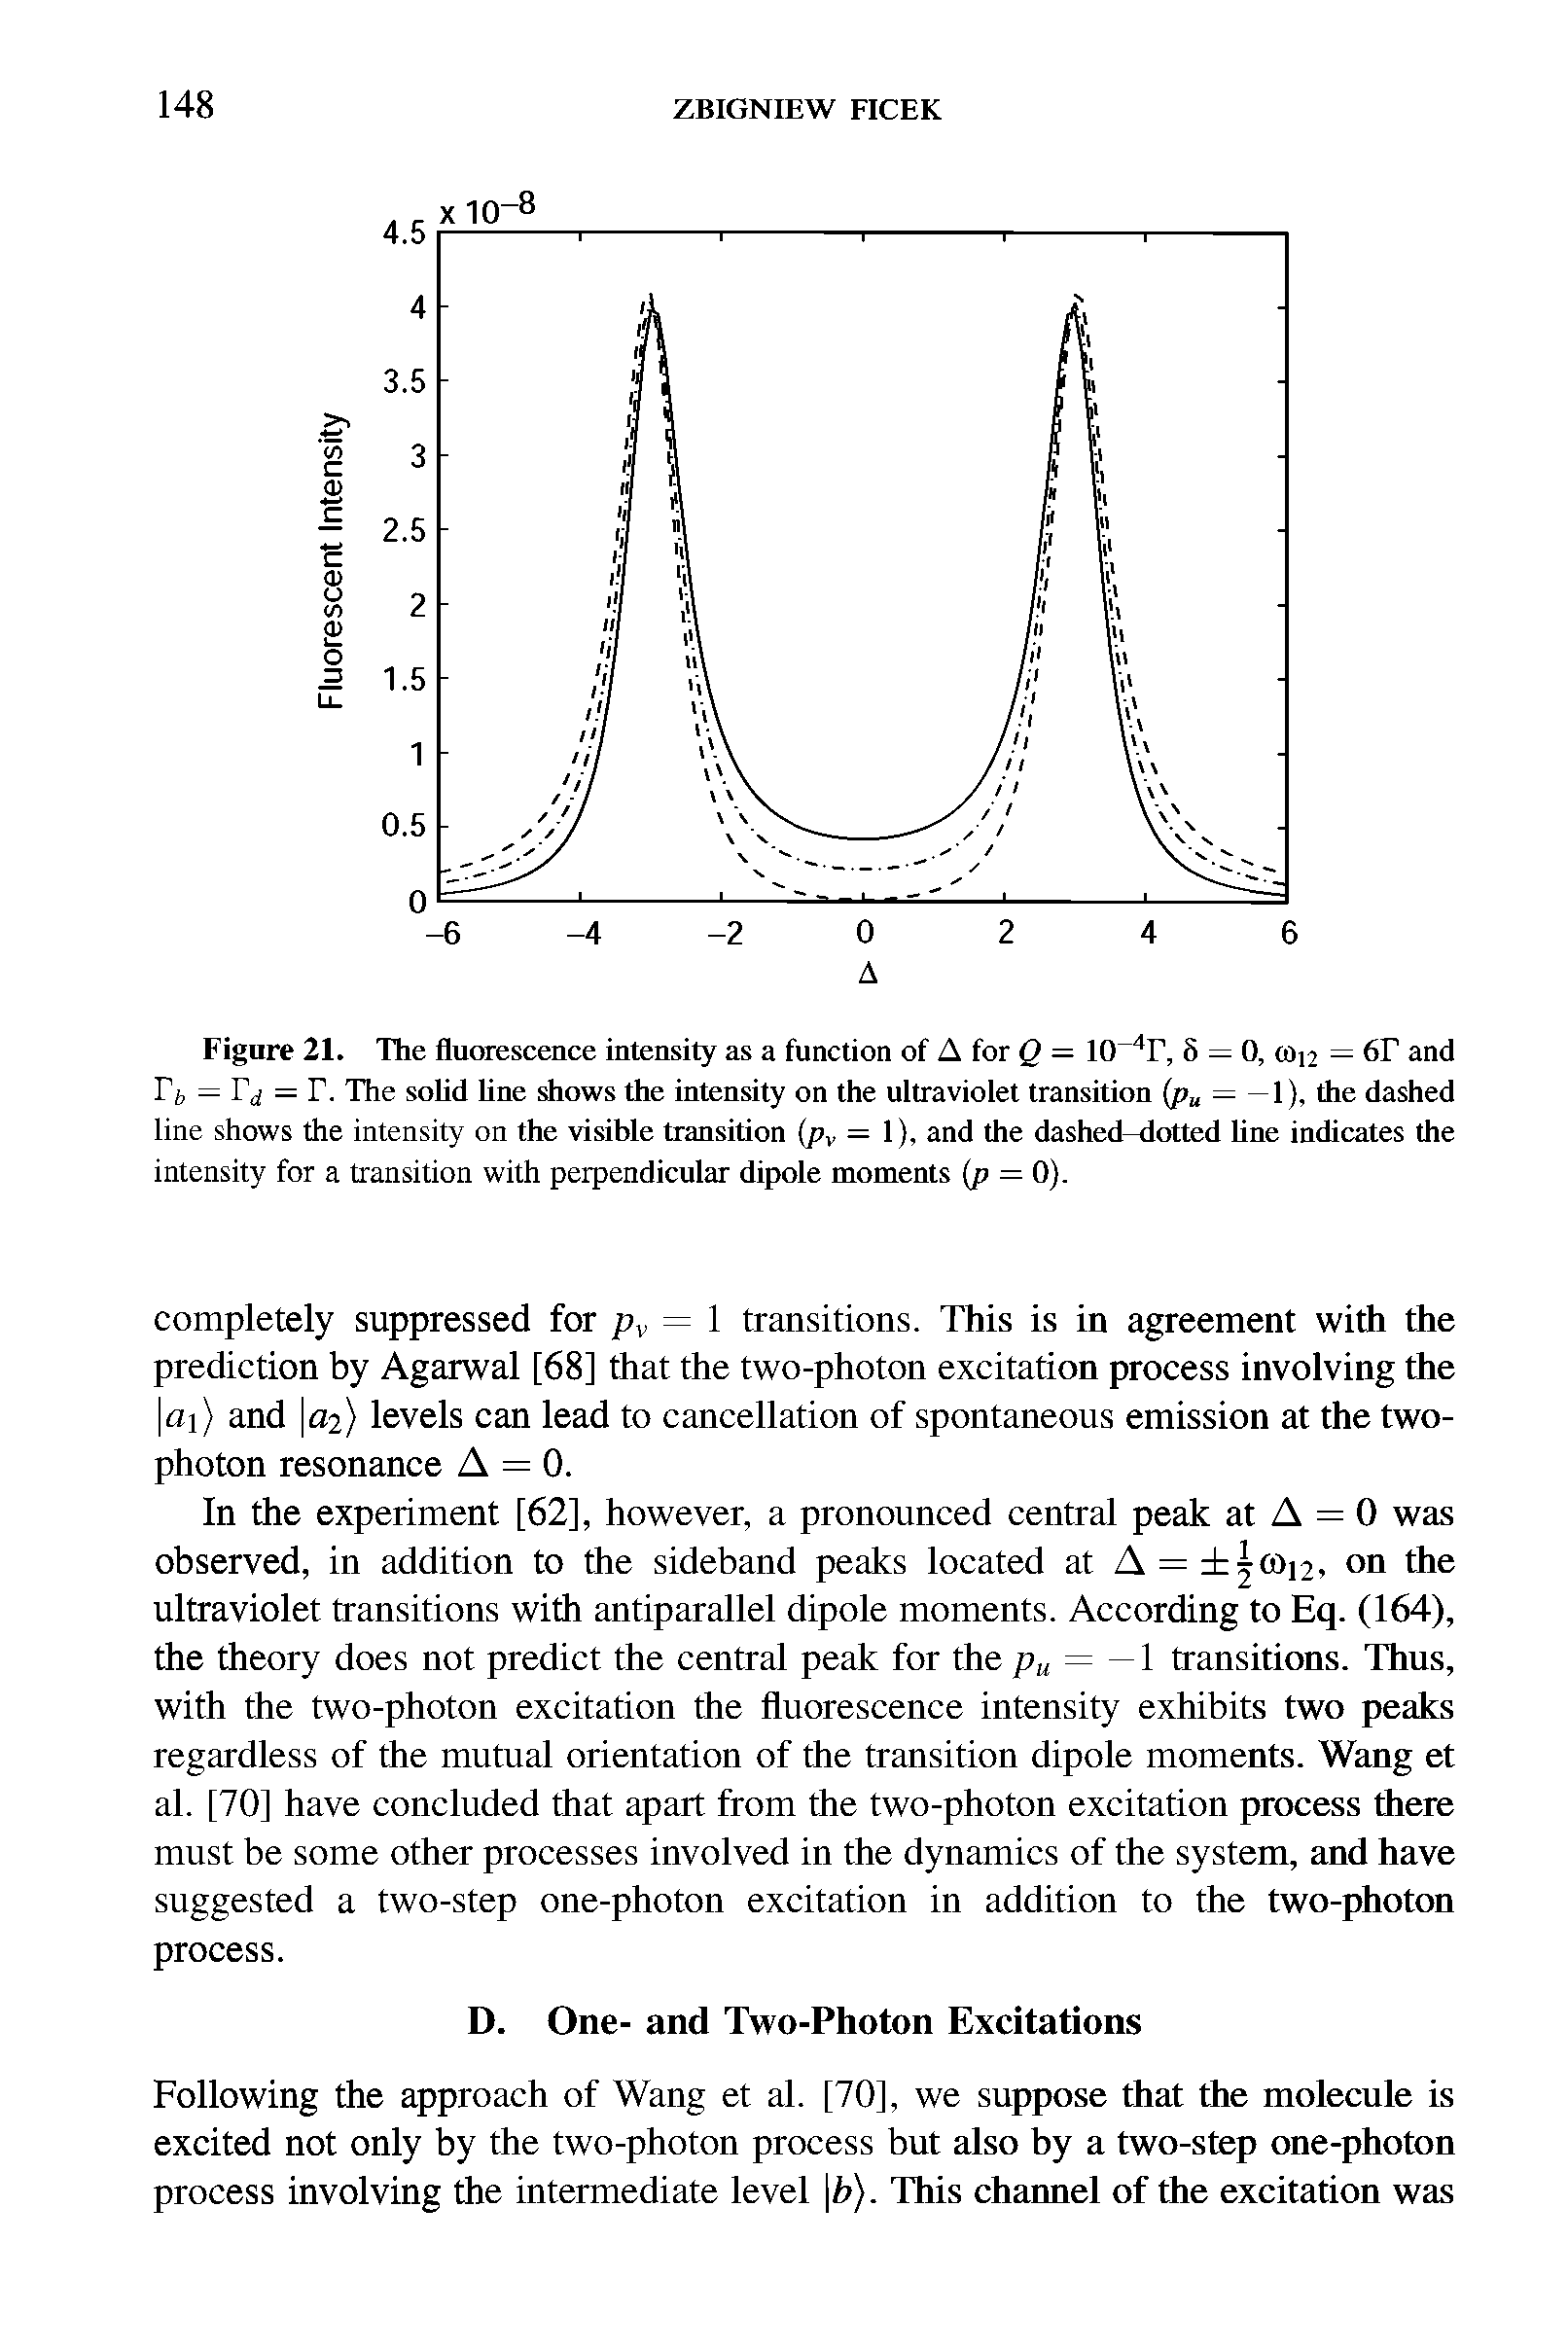 Figure 21. The fluorescence intensity as a function of A for Q = 10 1 It 8 = 0, CO12 = or and I /, — 1 j = T. The solid line shows the intensity on the ultraviolet transition (pu = —1), the dashed line shows the intensity on the visible transition (pv =1), and the dashed-dotted line indicates the intensity for a transition with perpendicular dipole moments (p = 0).